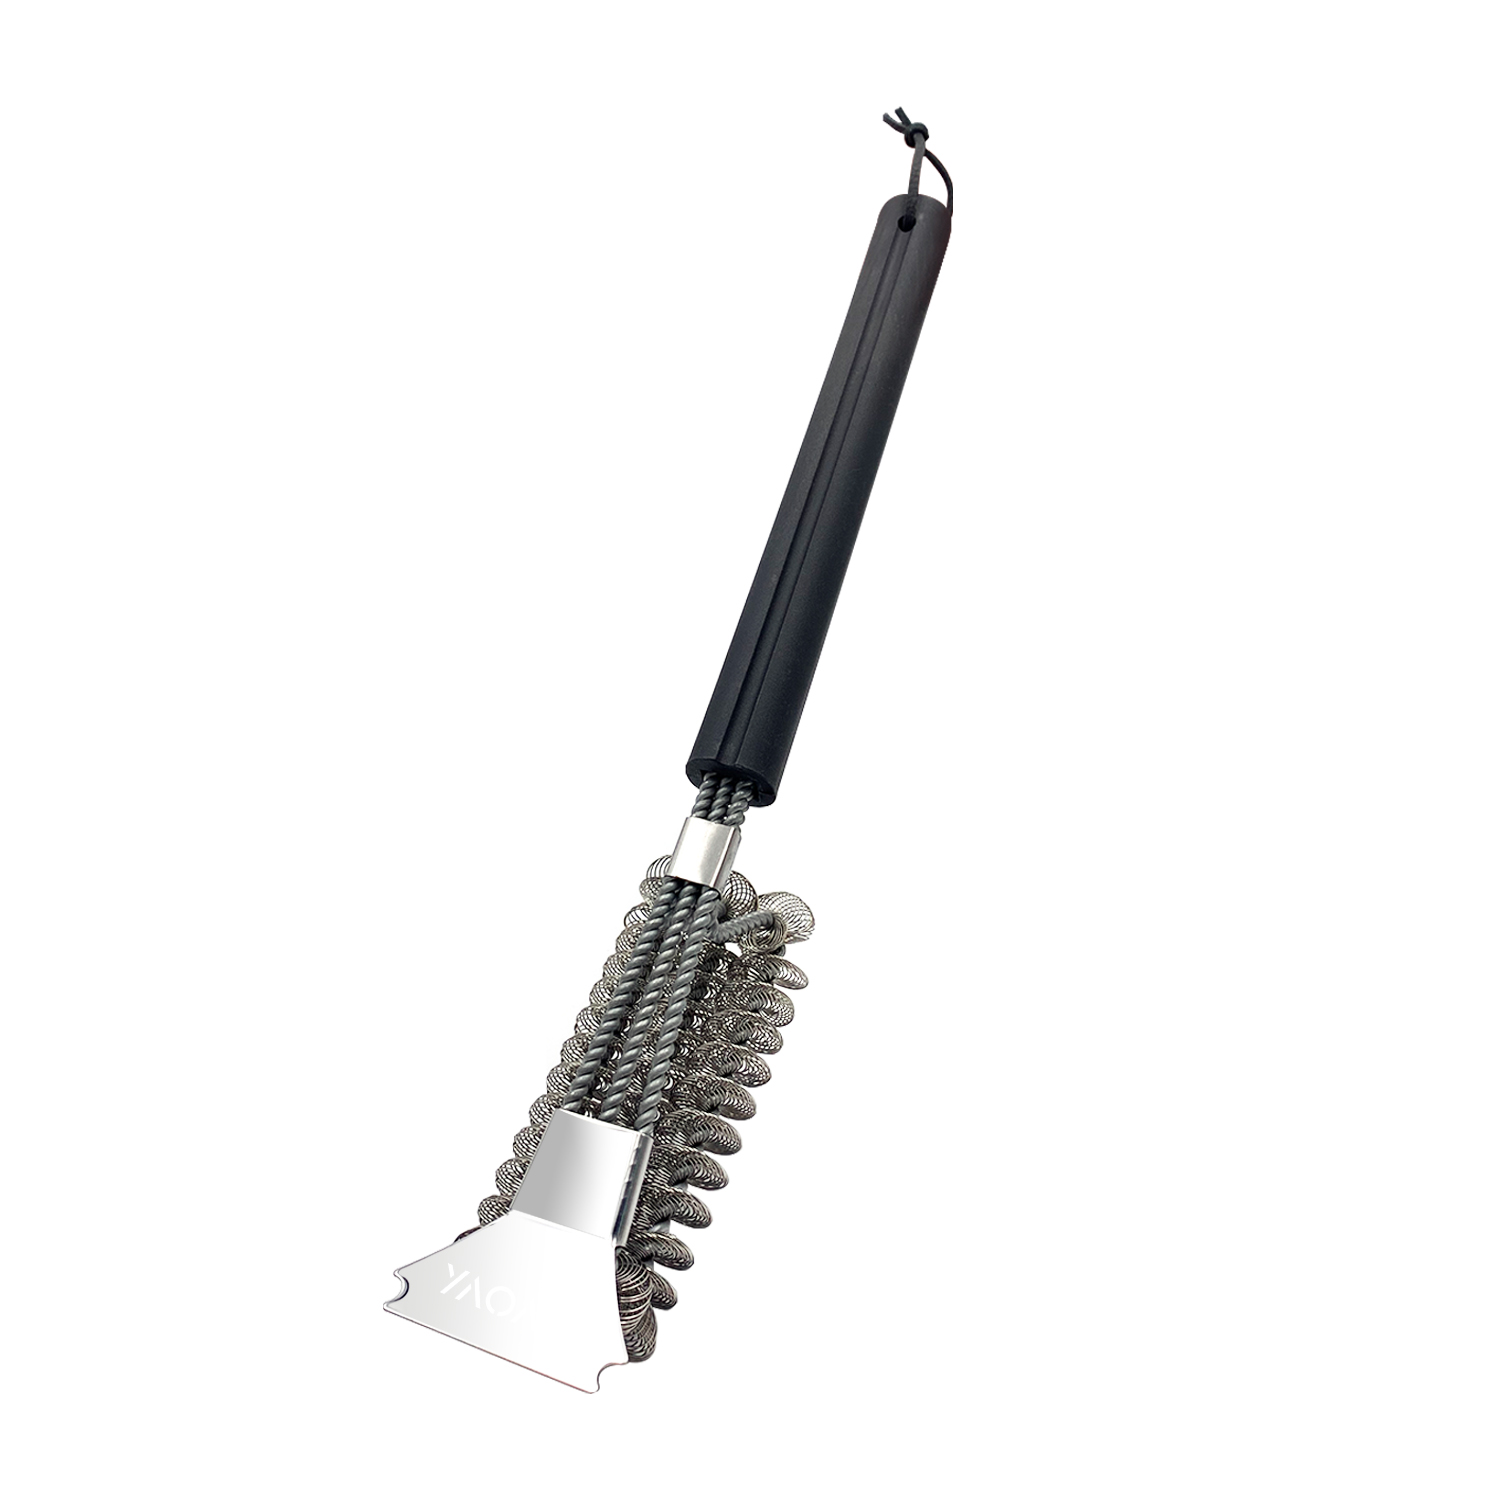 Grill Brush Bristle Free, Stainless Steel Grilling Brush Cleaner -YAOAWE 